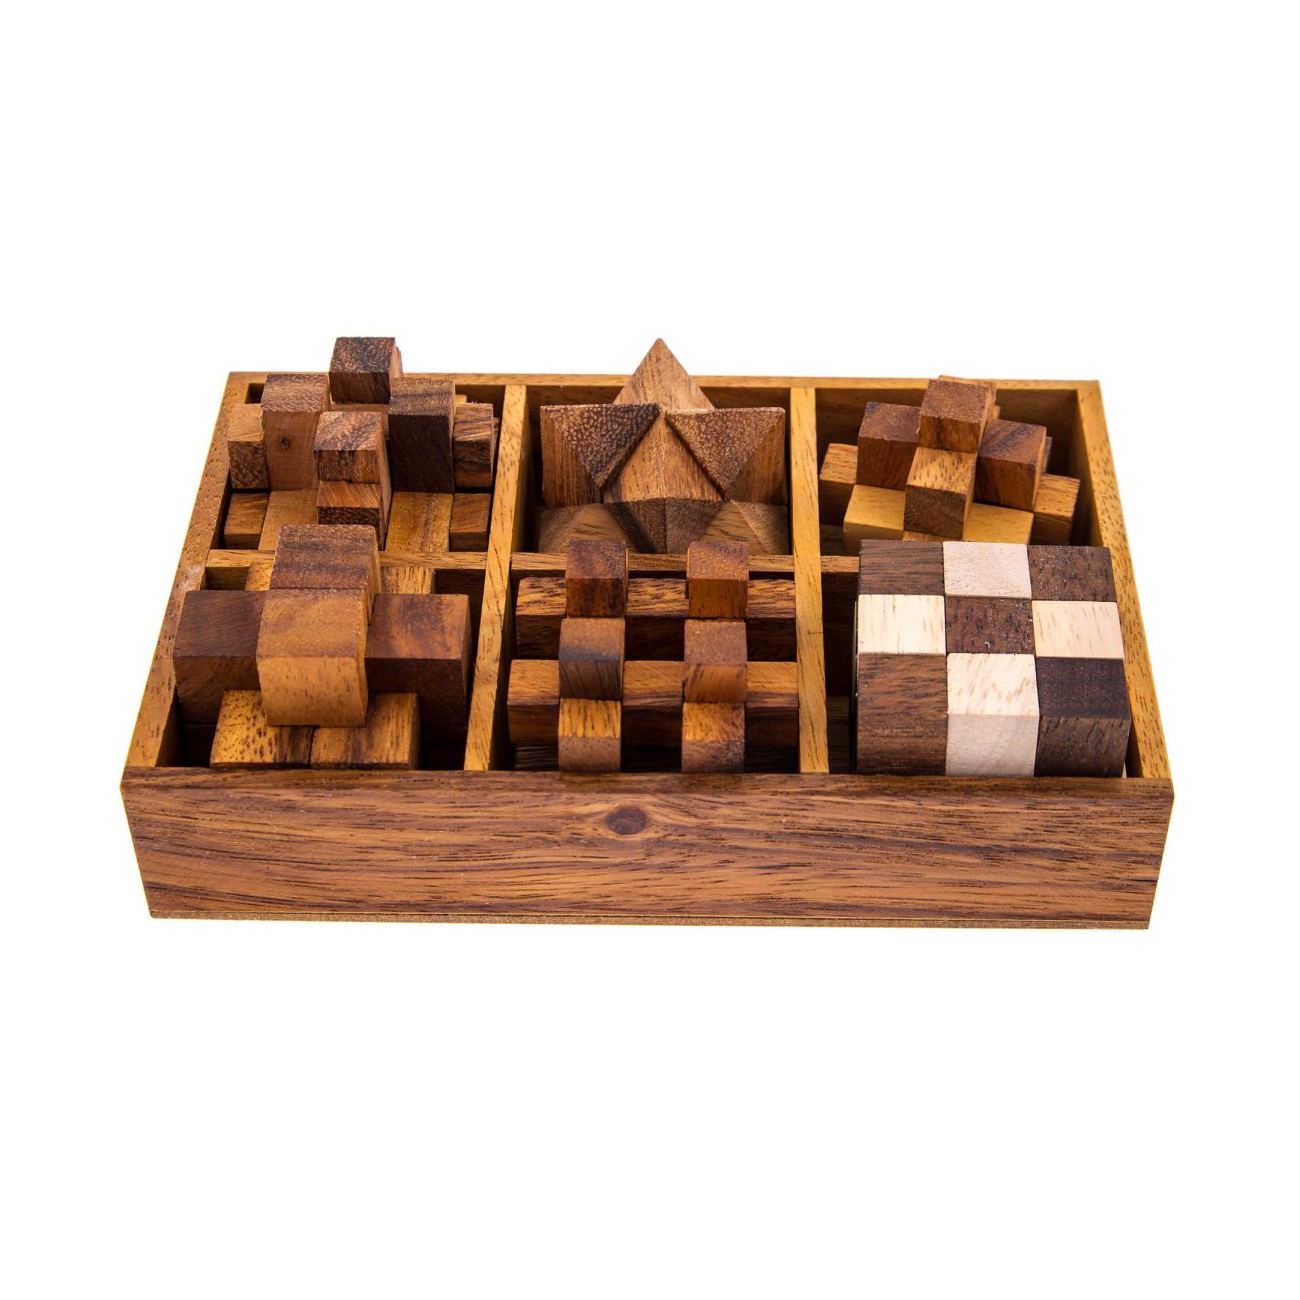 The Musem Collection Wooden Paradigm Puzzle Brain Teaser 